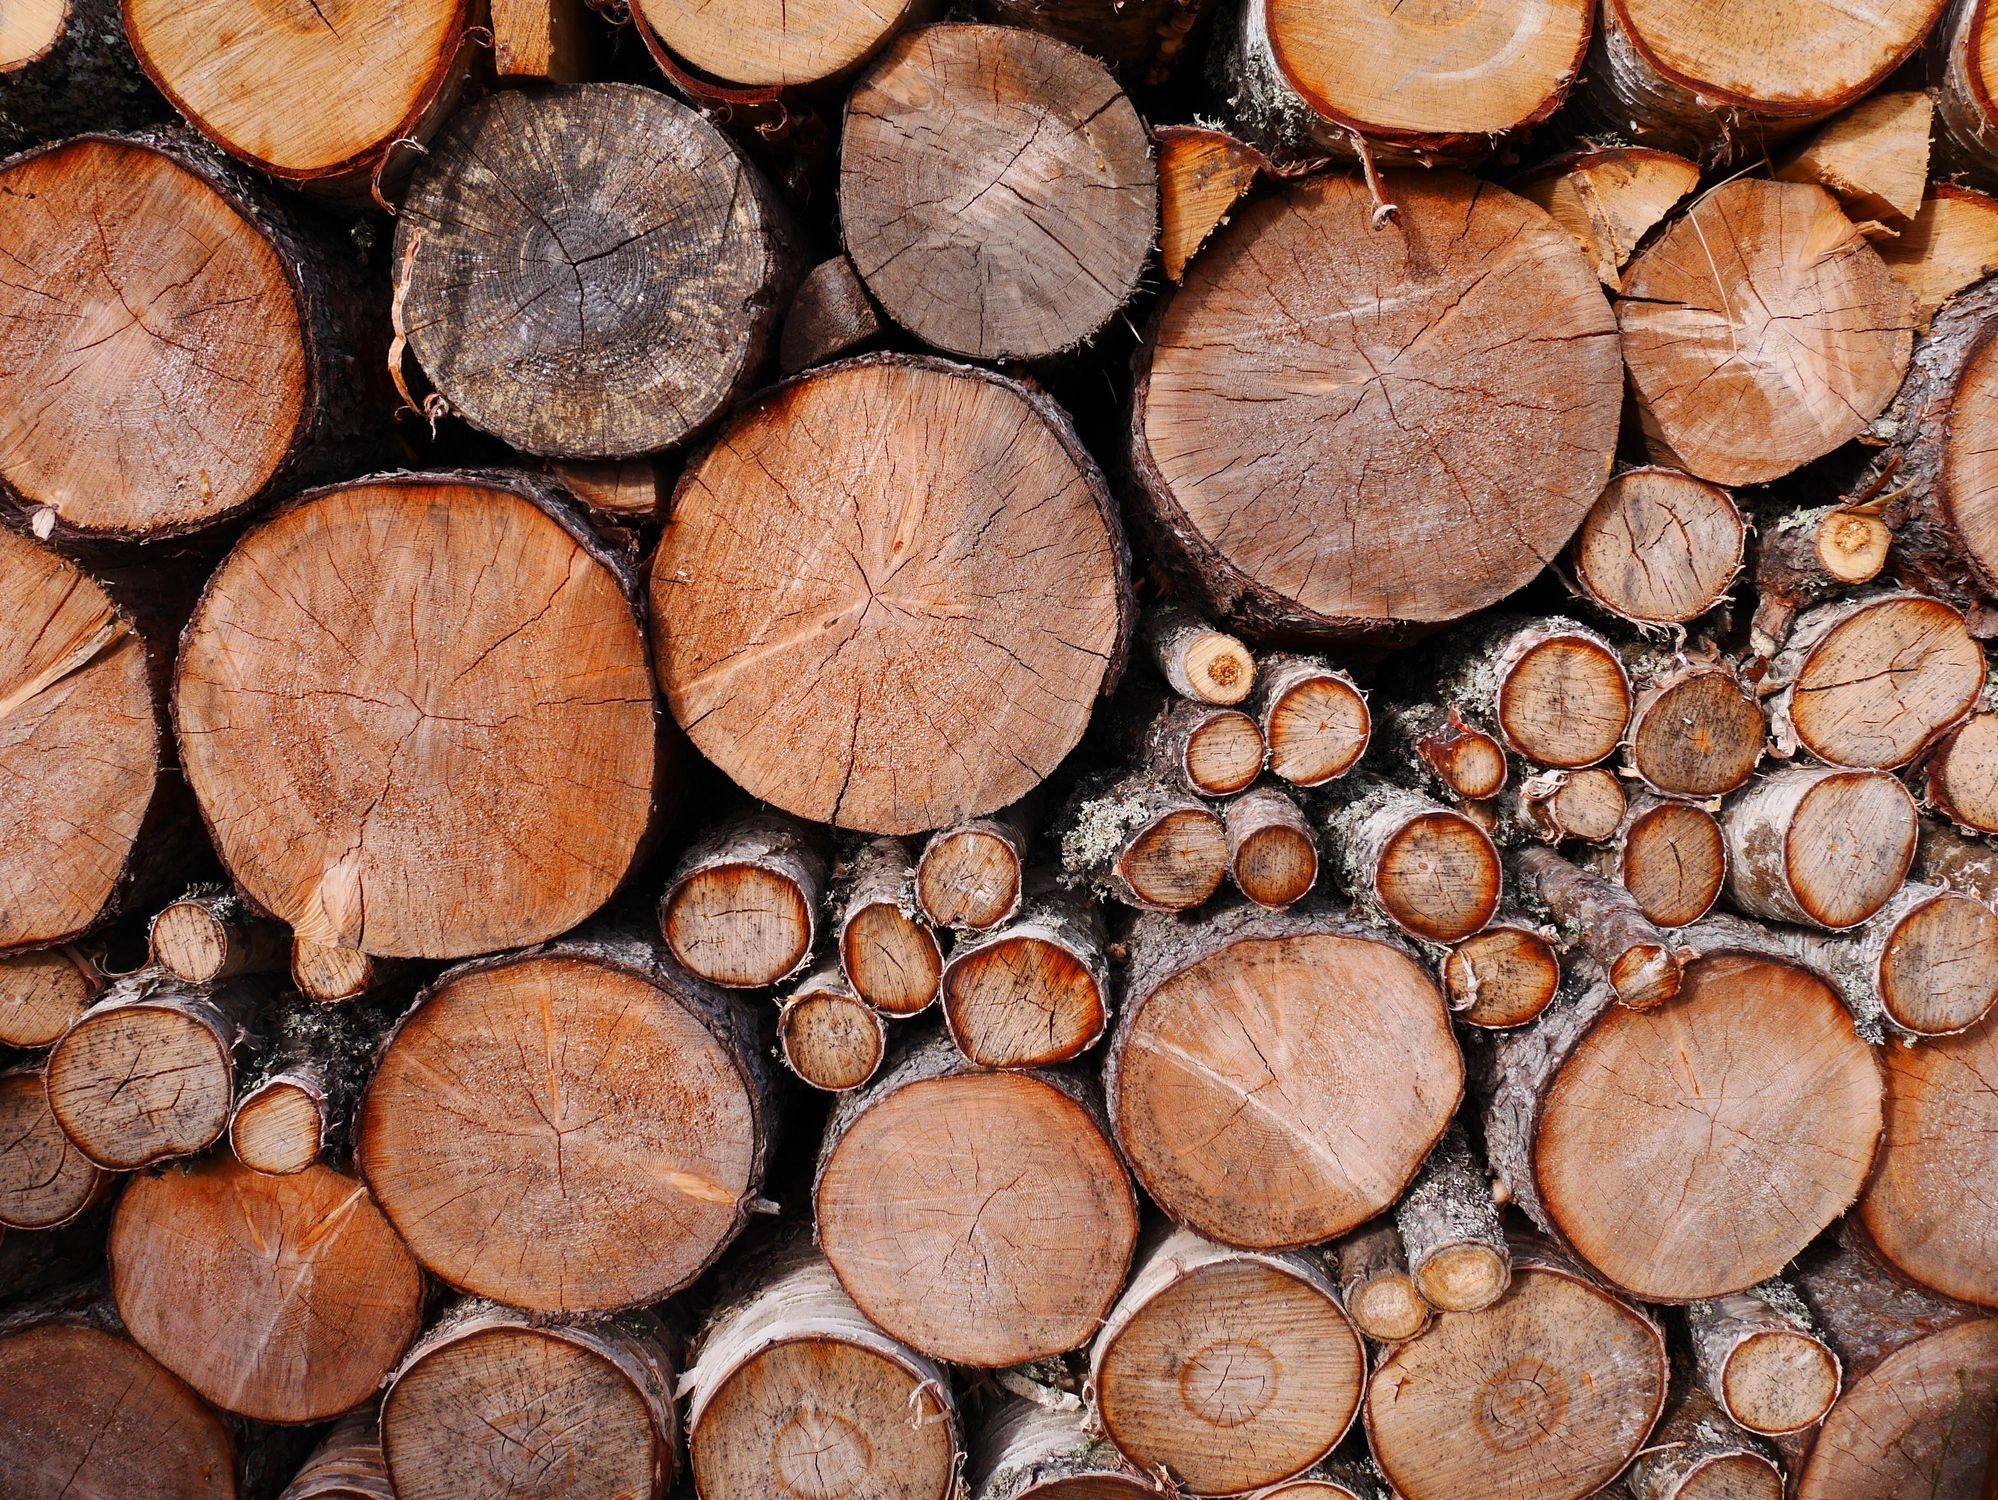 Call us today! Firewood, logging services, logging, land clearing, land management, select cutting, 